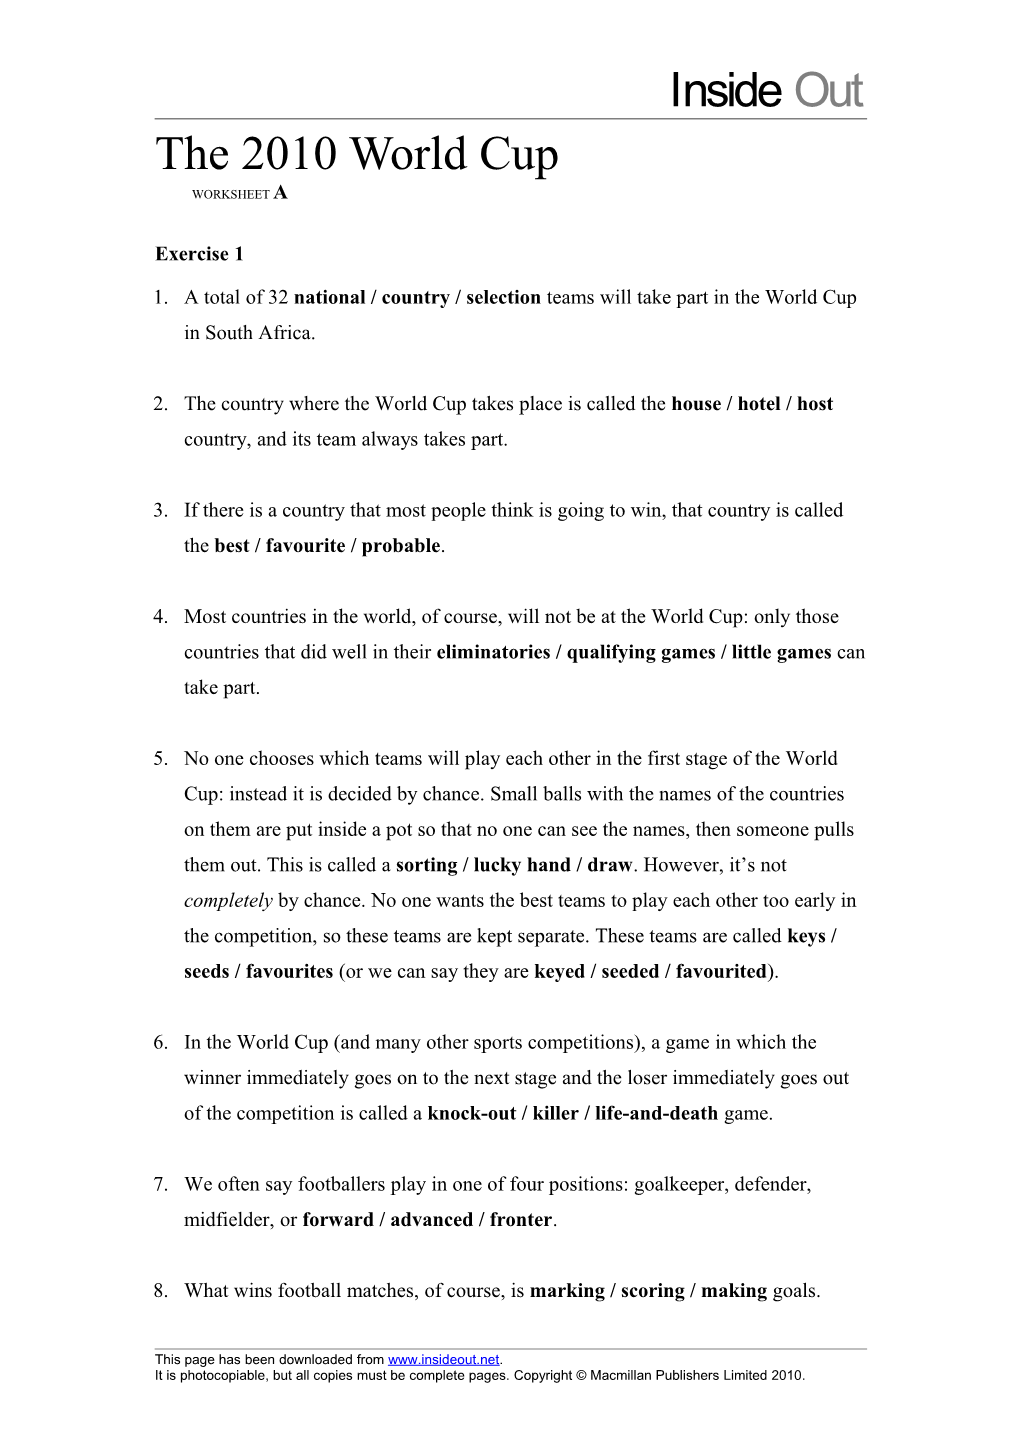 The 2010 World Cup WORKSHEET A